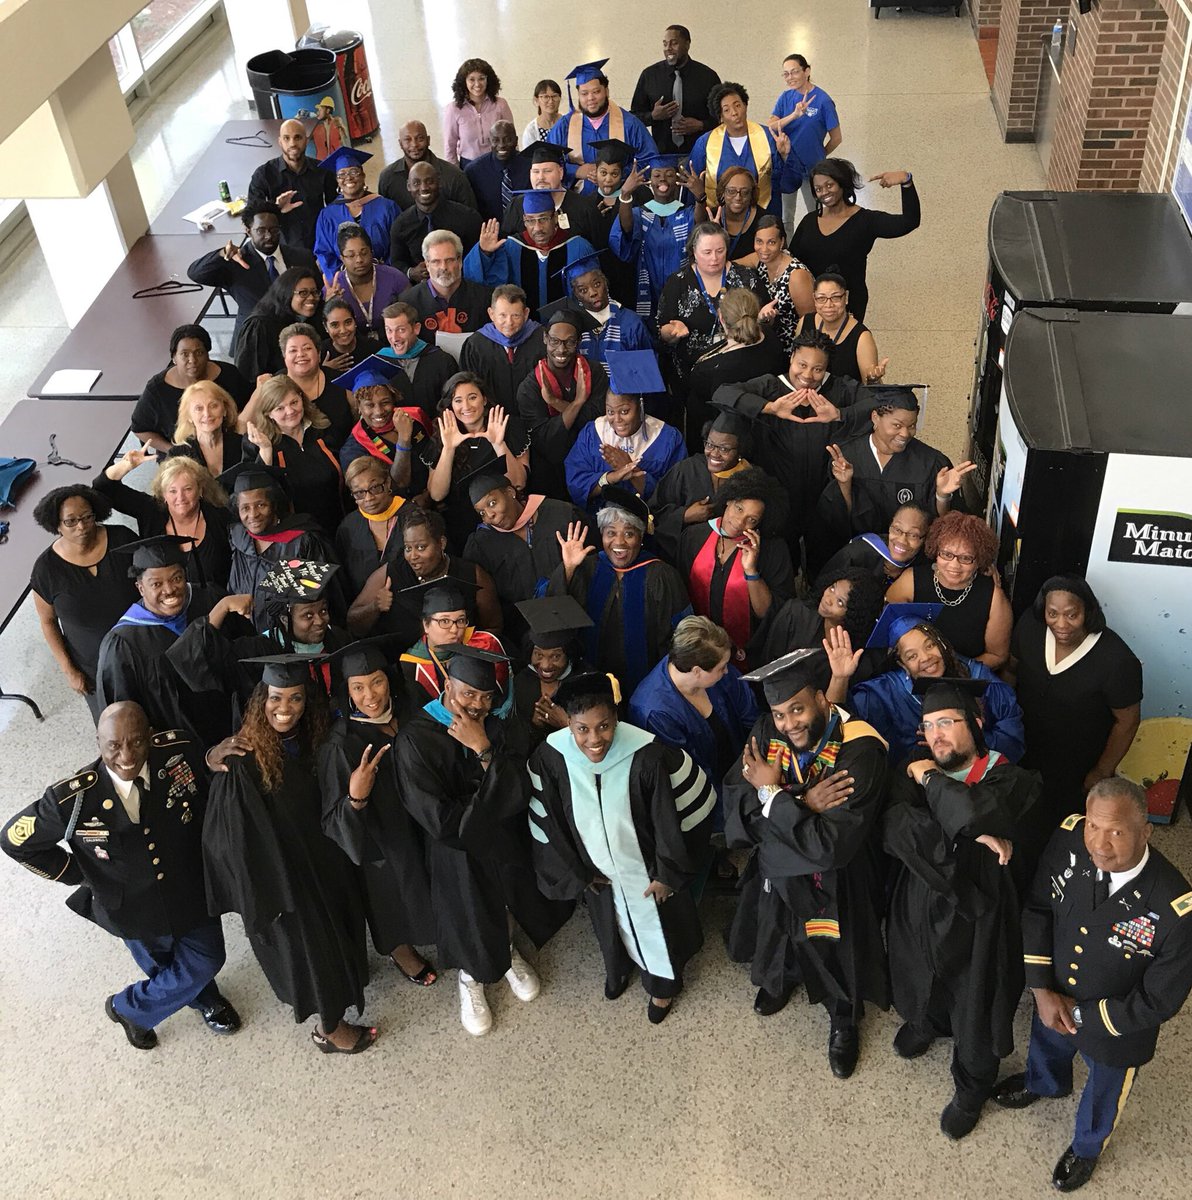 Westoverhigh on Twitter "Open House or Graduation? Westover High